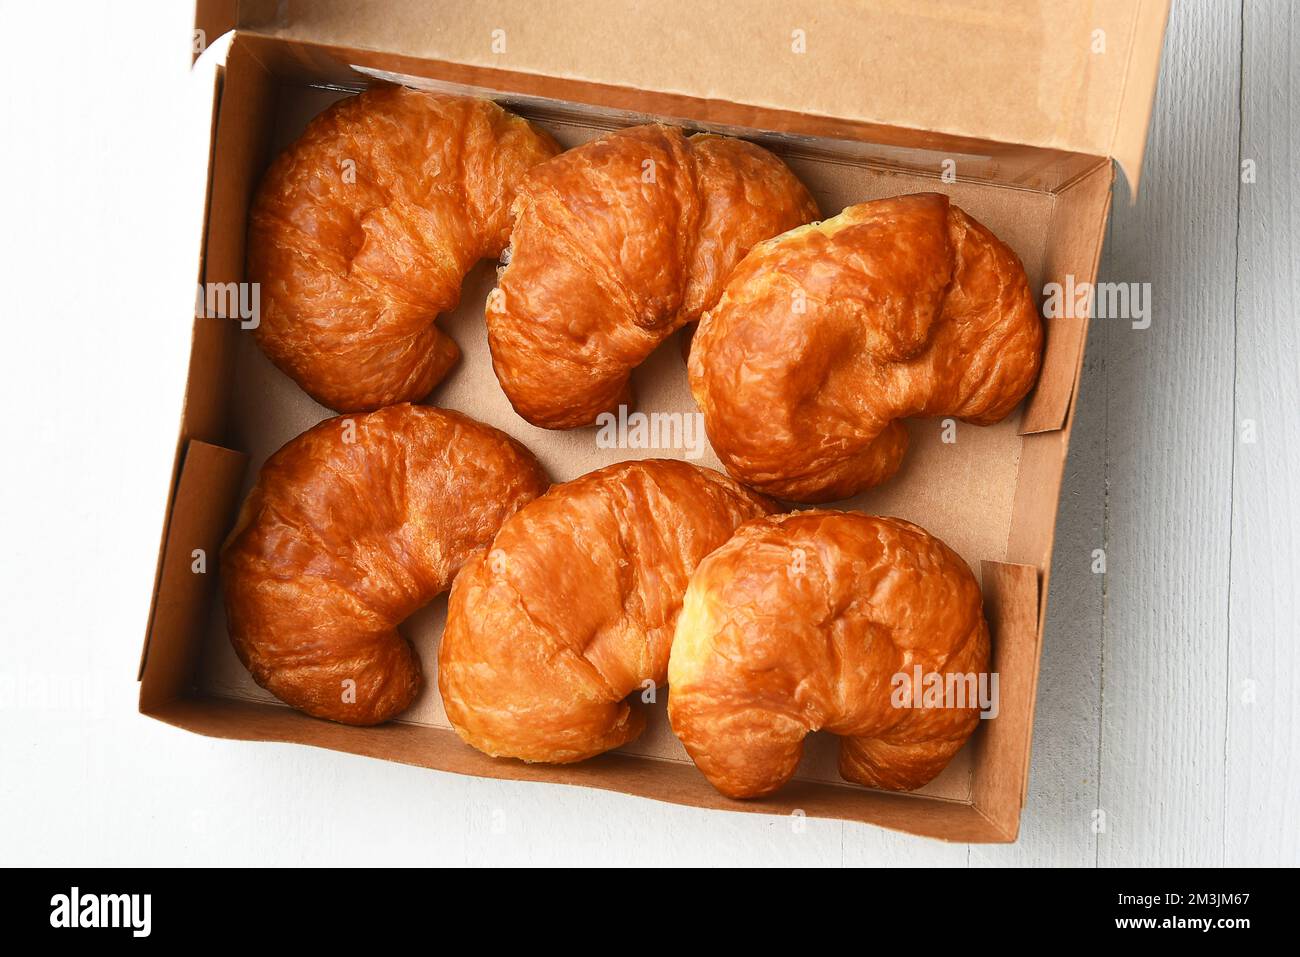 High angle shot of six fresh baked Croissants in an open bakery box. Stock Photo